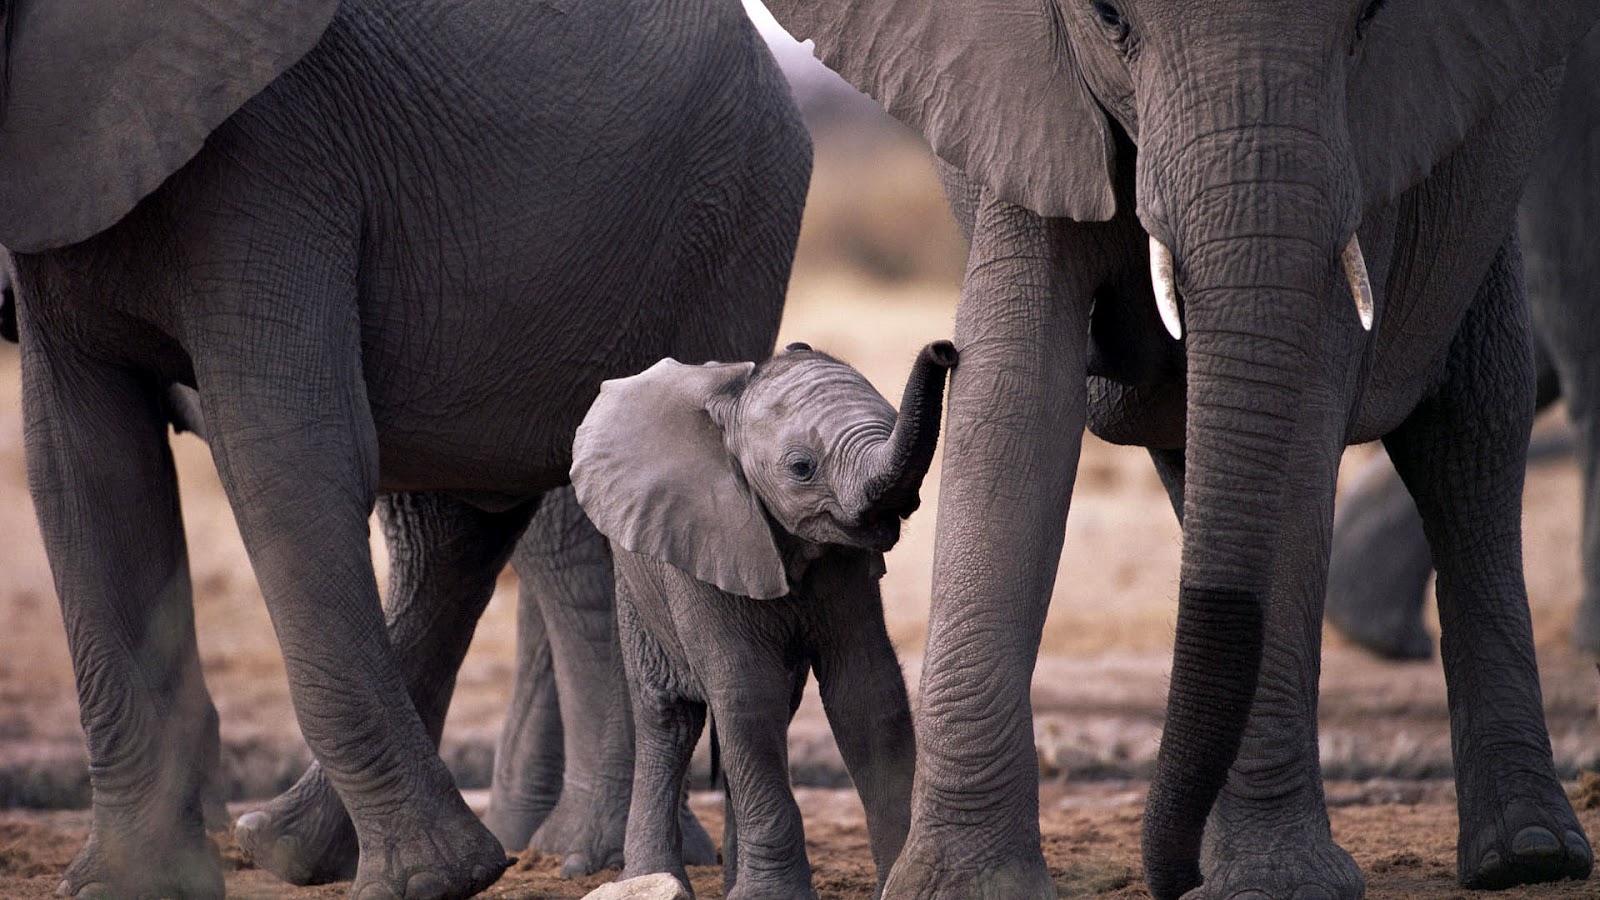 HD Animal Wallpaper With A Baby Elephant